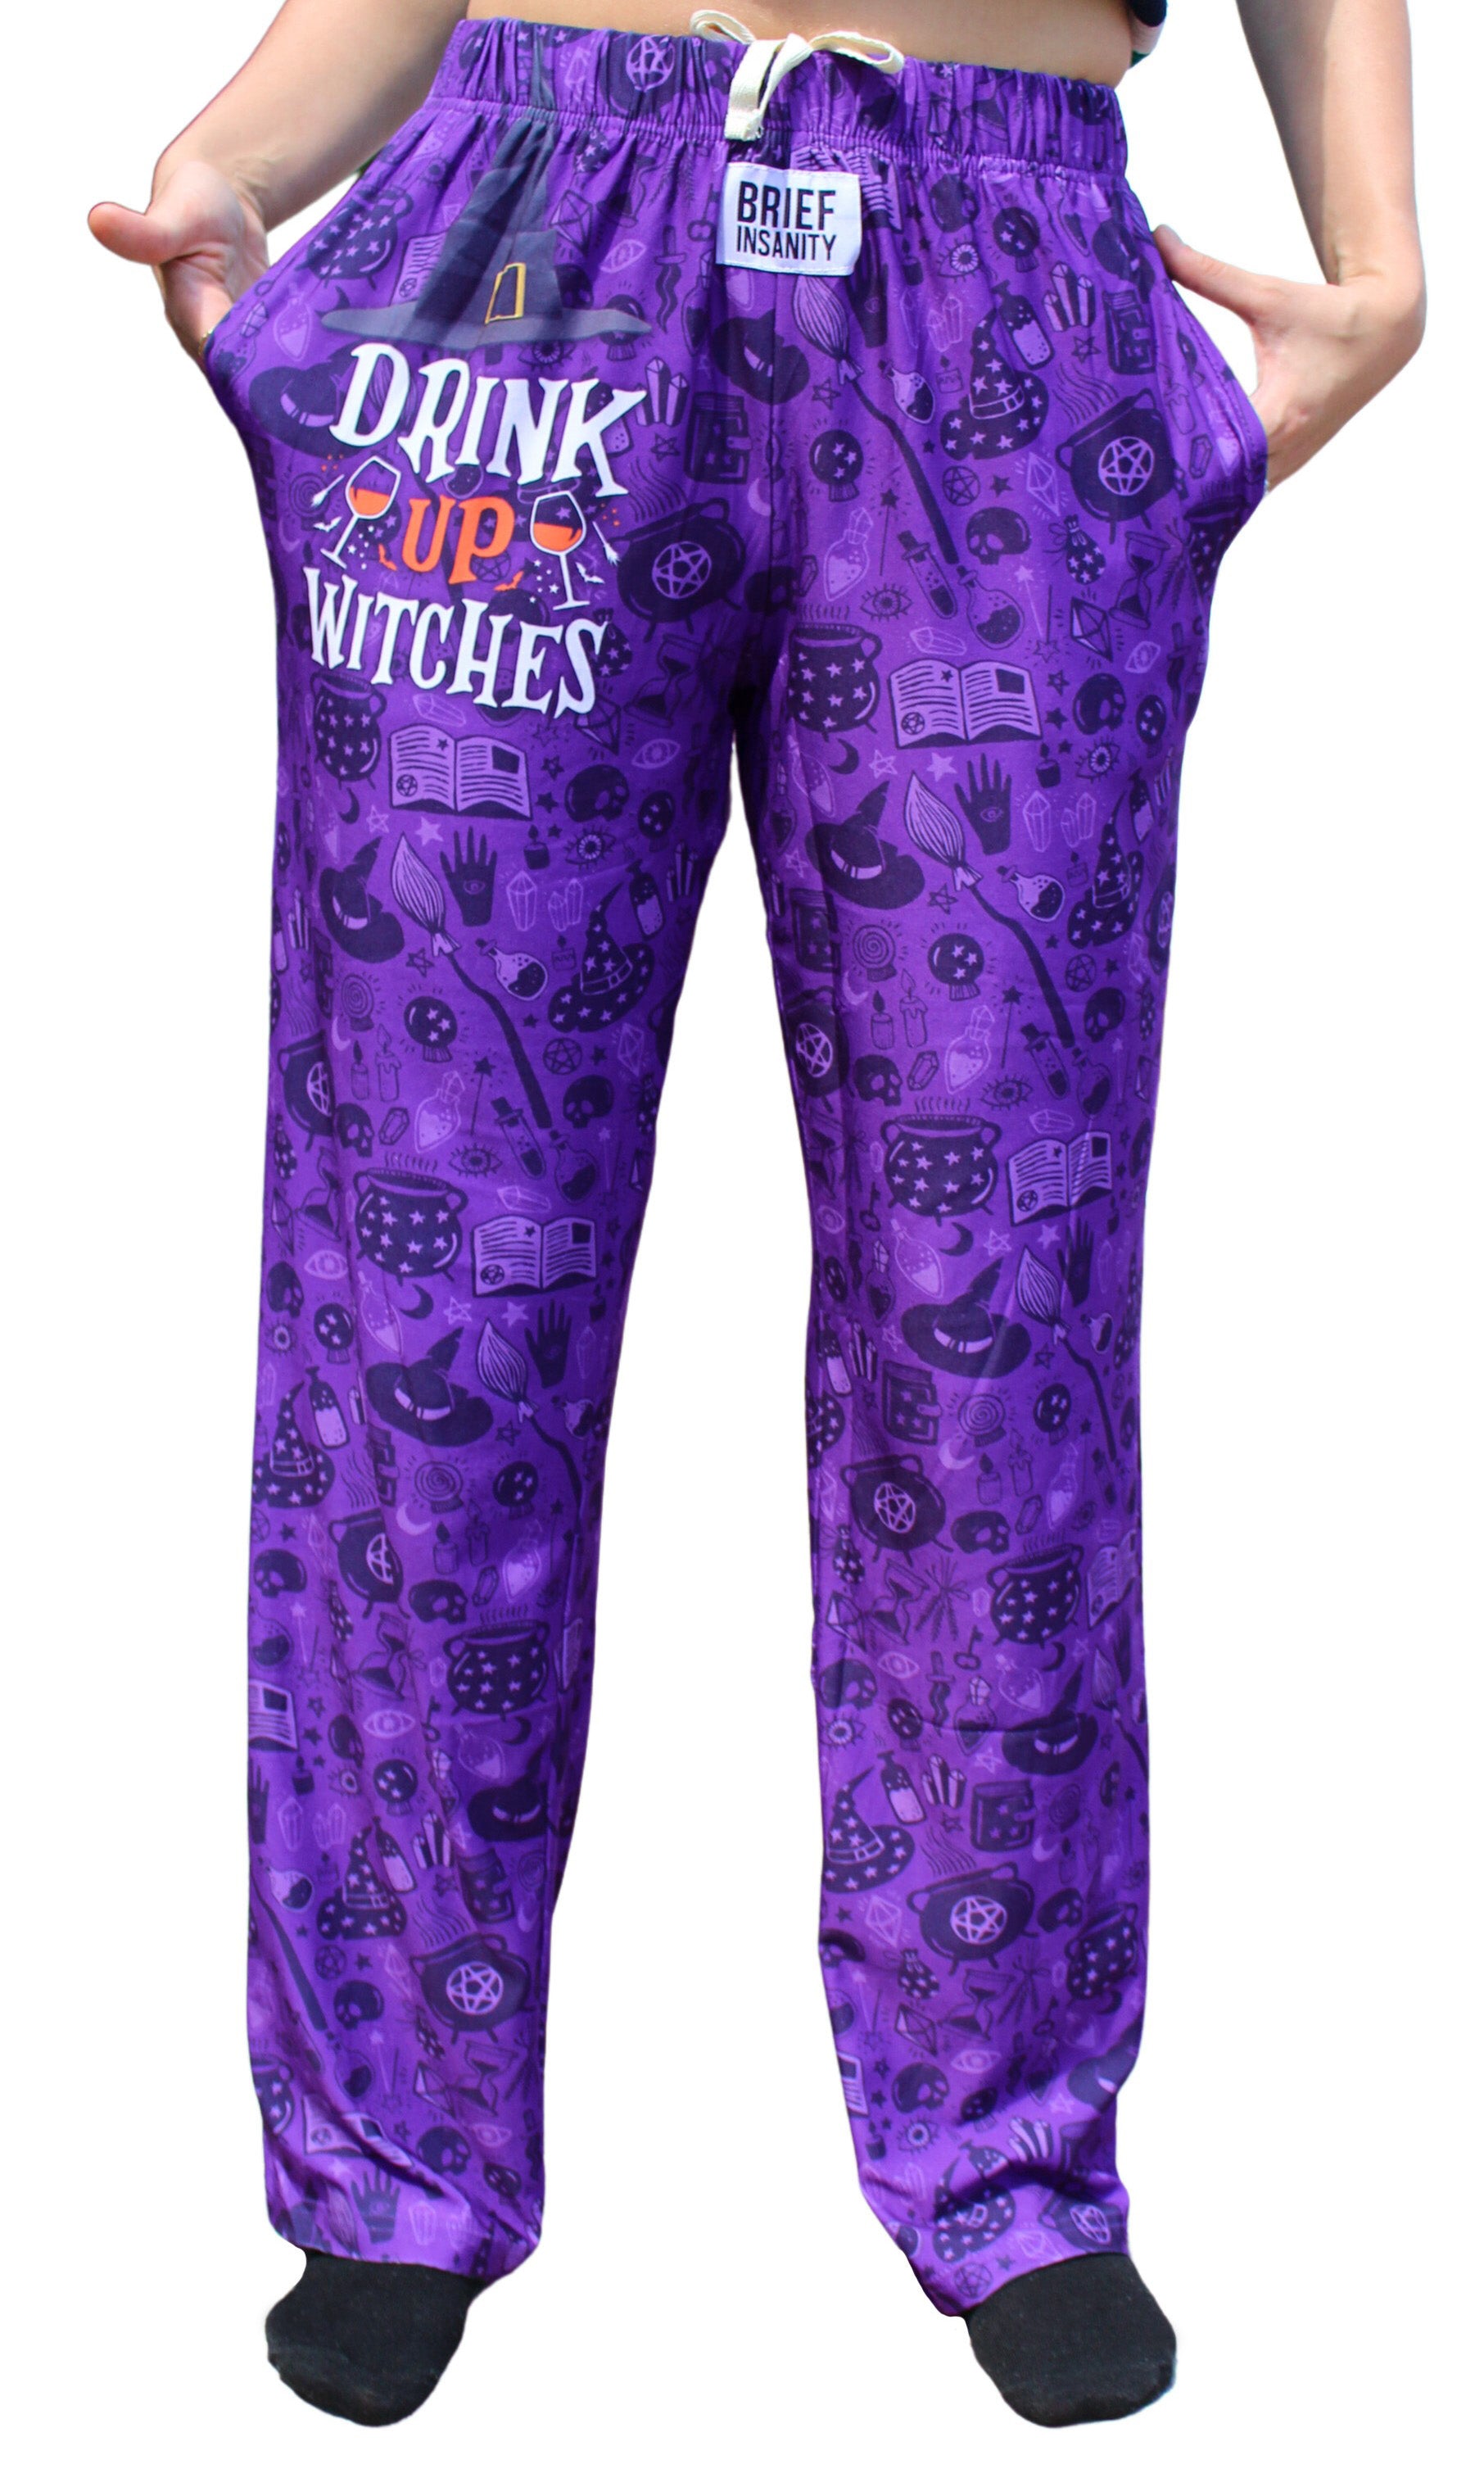 Drink Up Witches Pajama Lounge Pants front view on model (waist down)